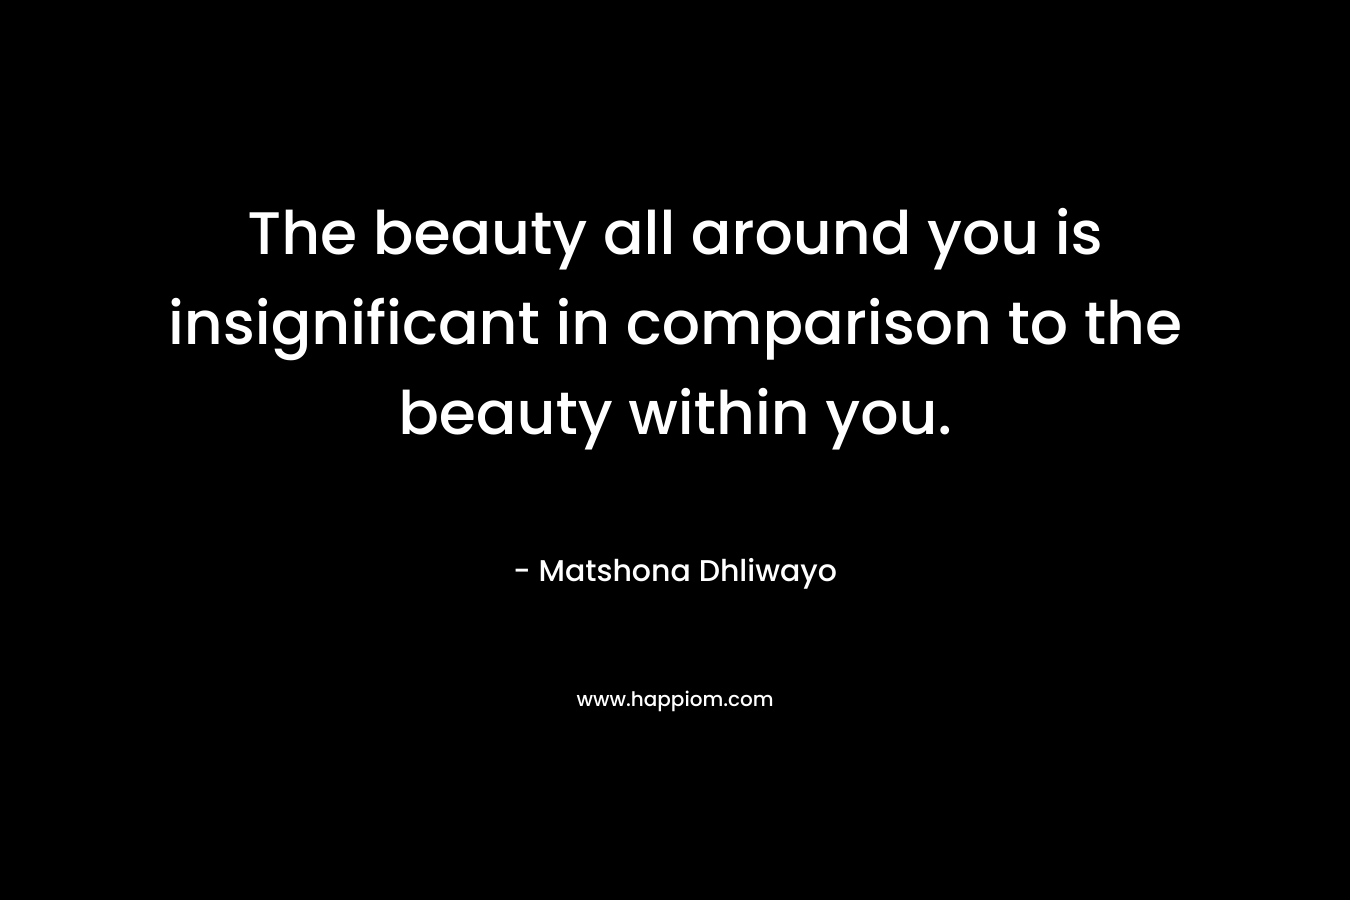 The beauty all around you is insignificant in comparison to the beauty within you. – Matshona Dhliwayo